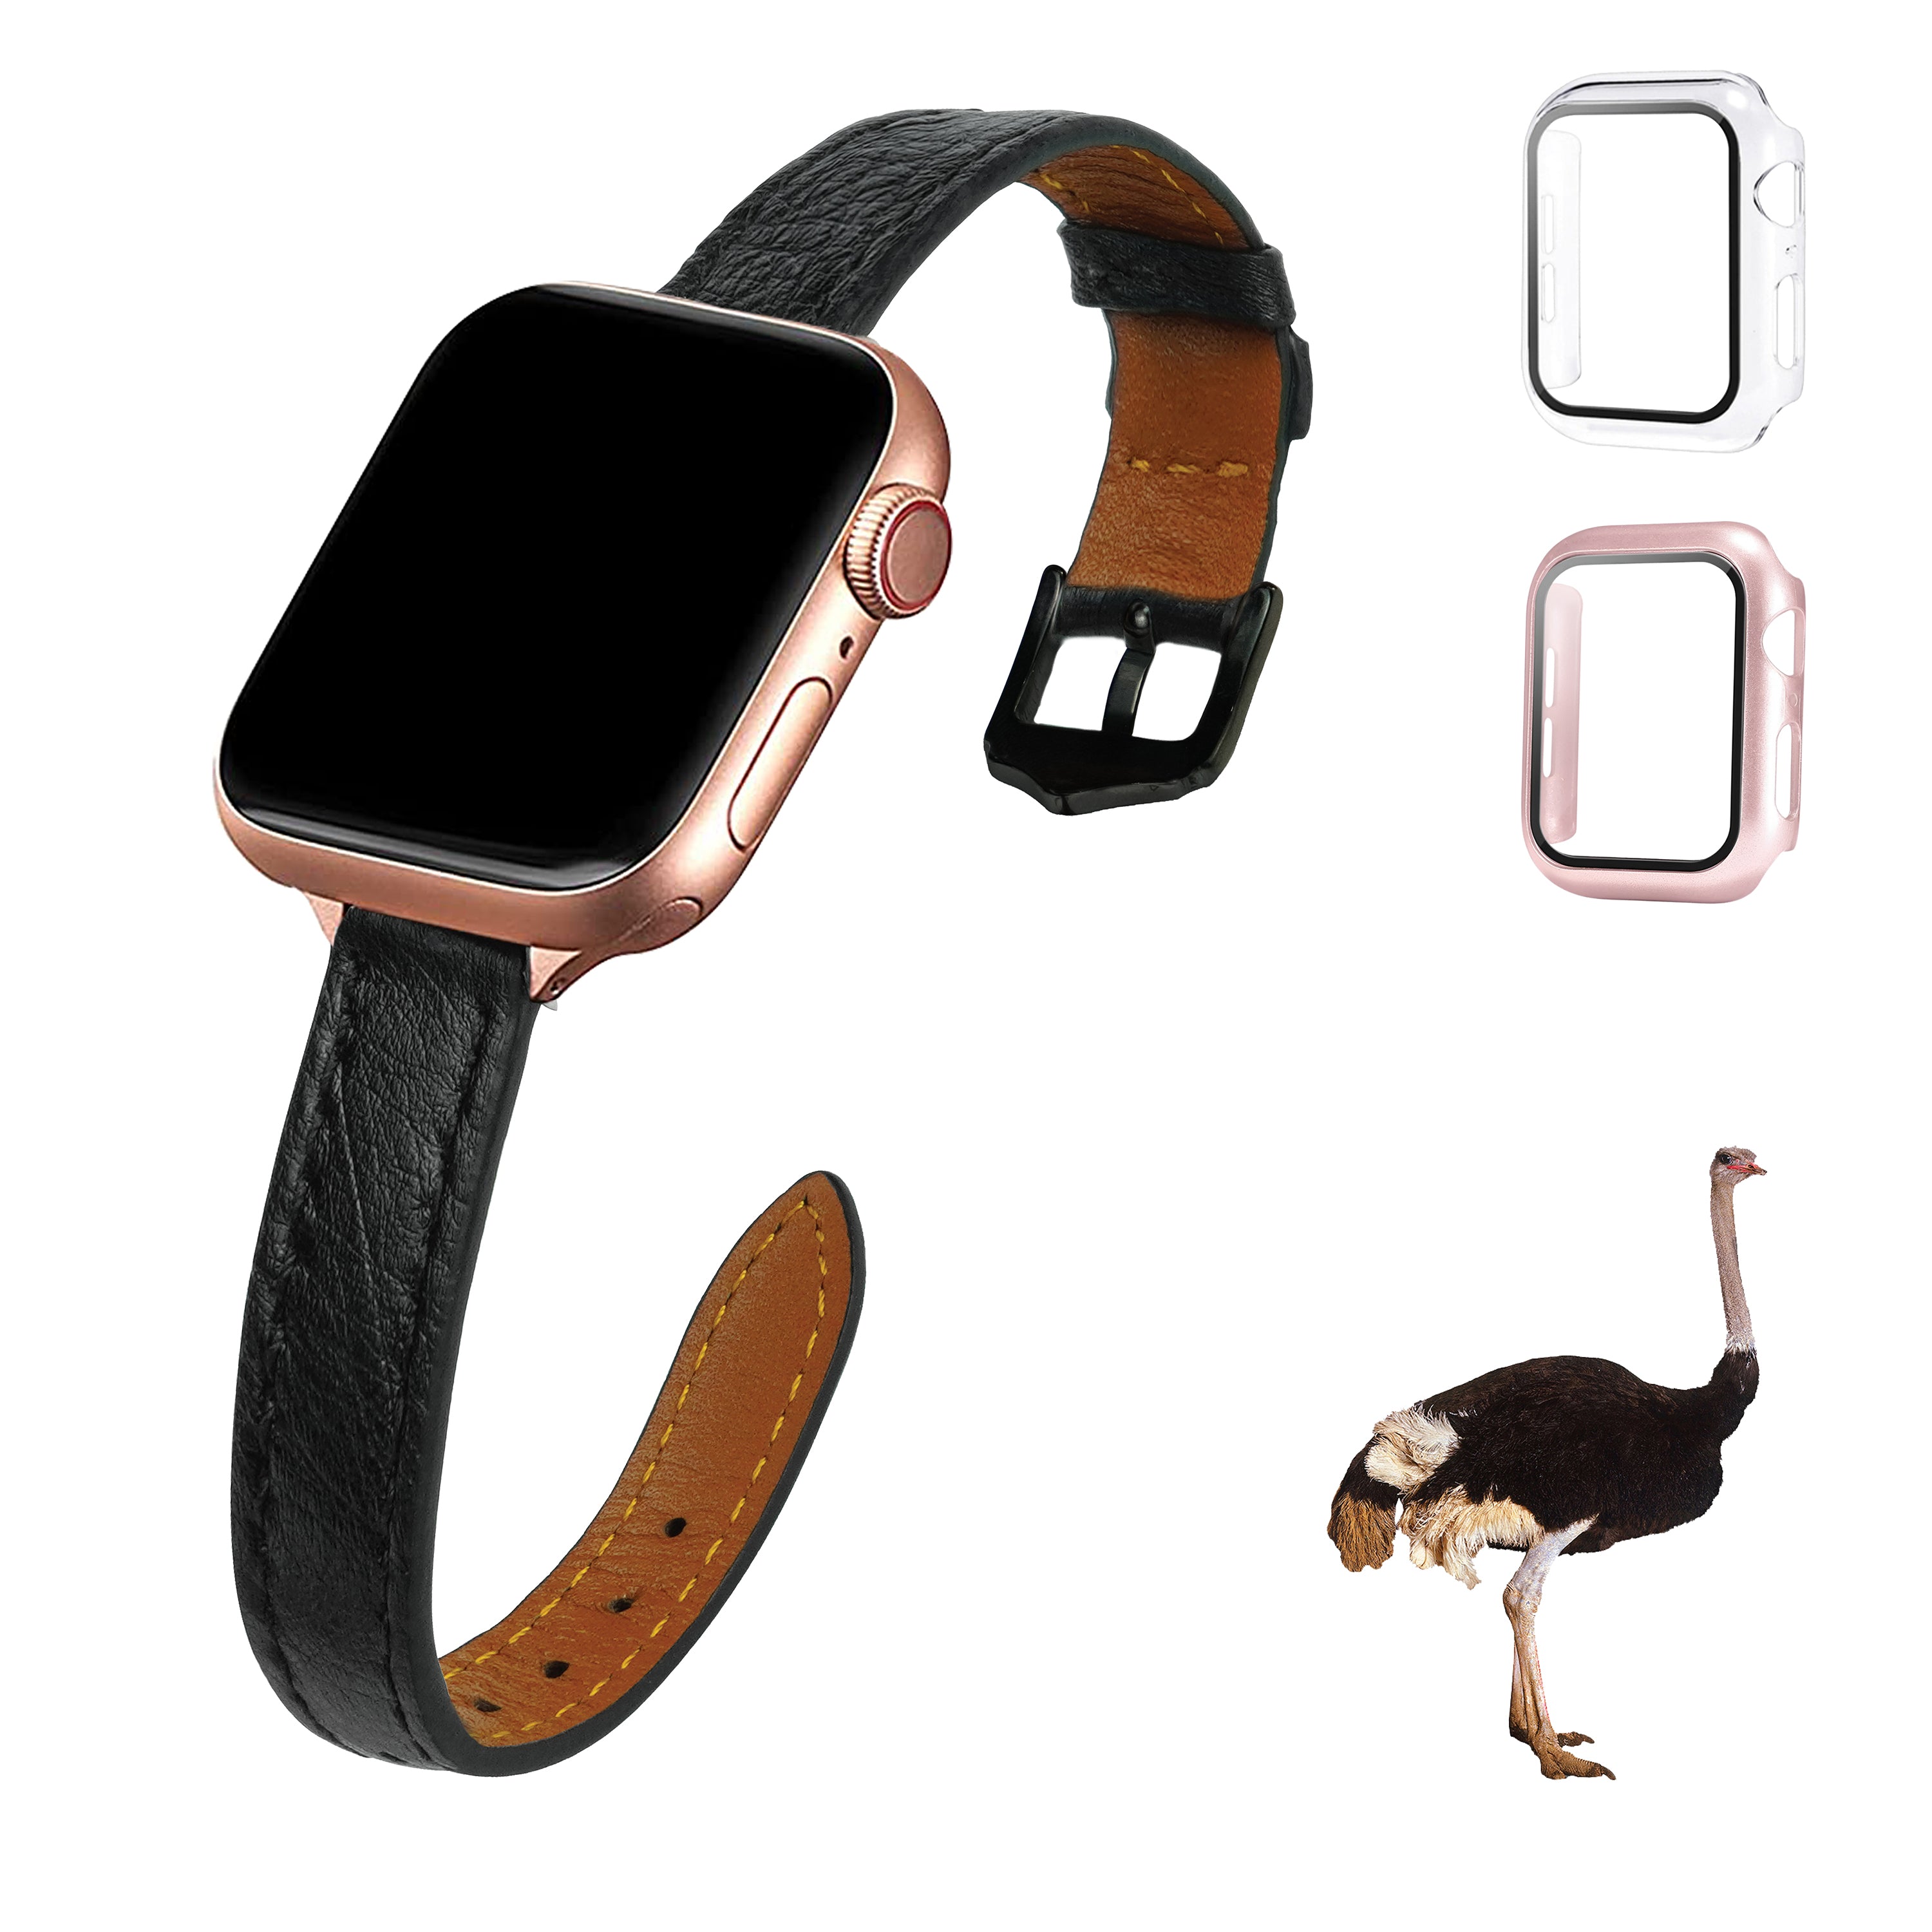 Black Flat Ostrich Leather Band Compatible Apple Watch Iwatch 38mm Screen Protector Case Elegant Vintage Replacement Strap For Smartwatch Series 1 2 3 Leather Handmade AW-181B-W-38MM